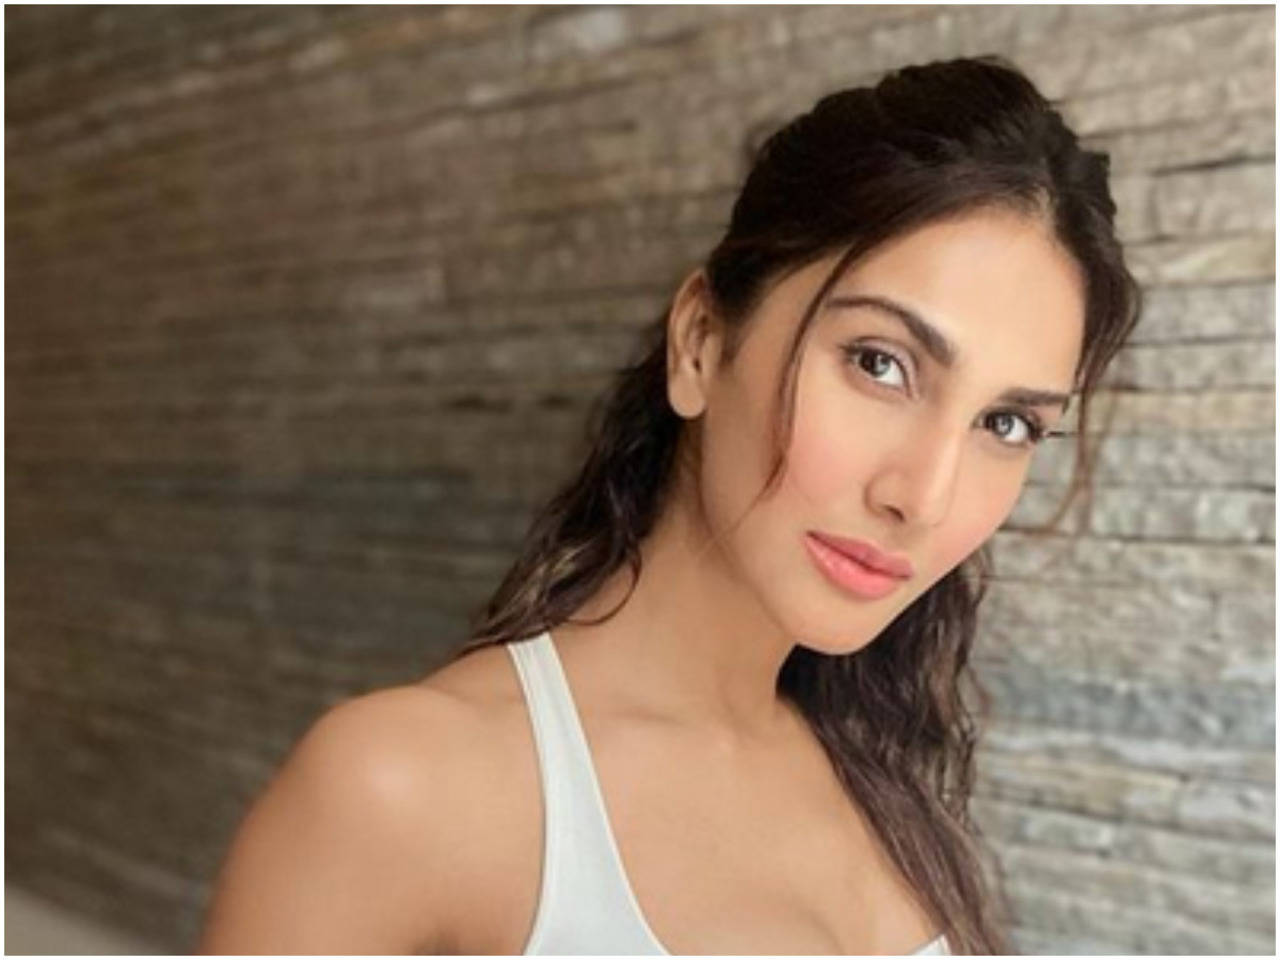 Vaani Kapoor is hoping for normalcy to return soon Hindi Movie News pic